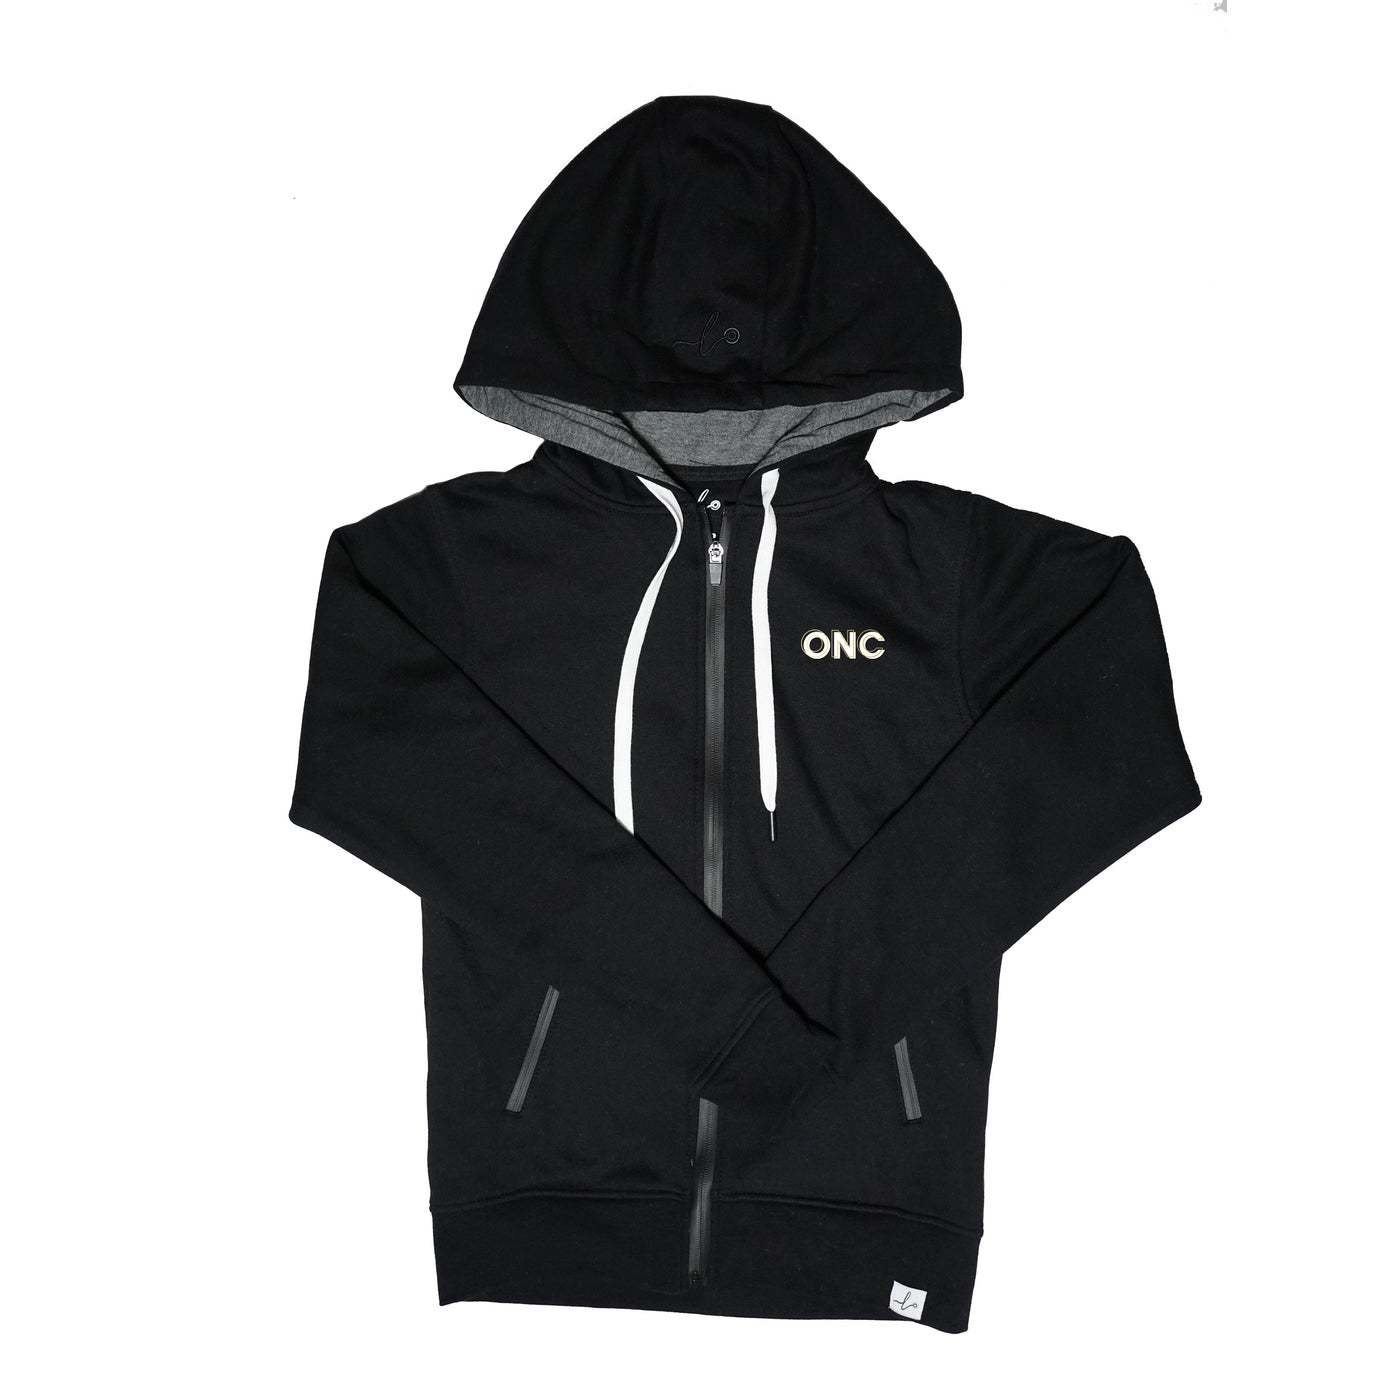 Oncology Creds - PRN Lux Hoodie